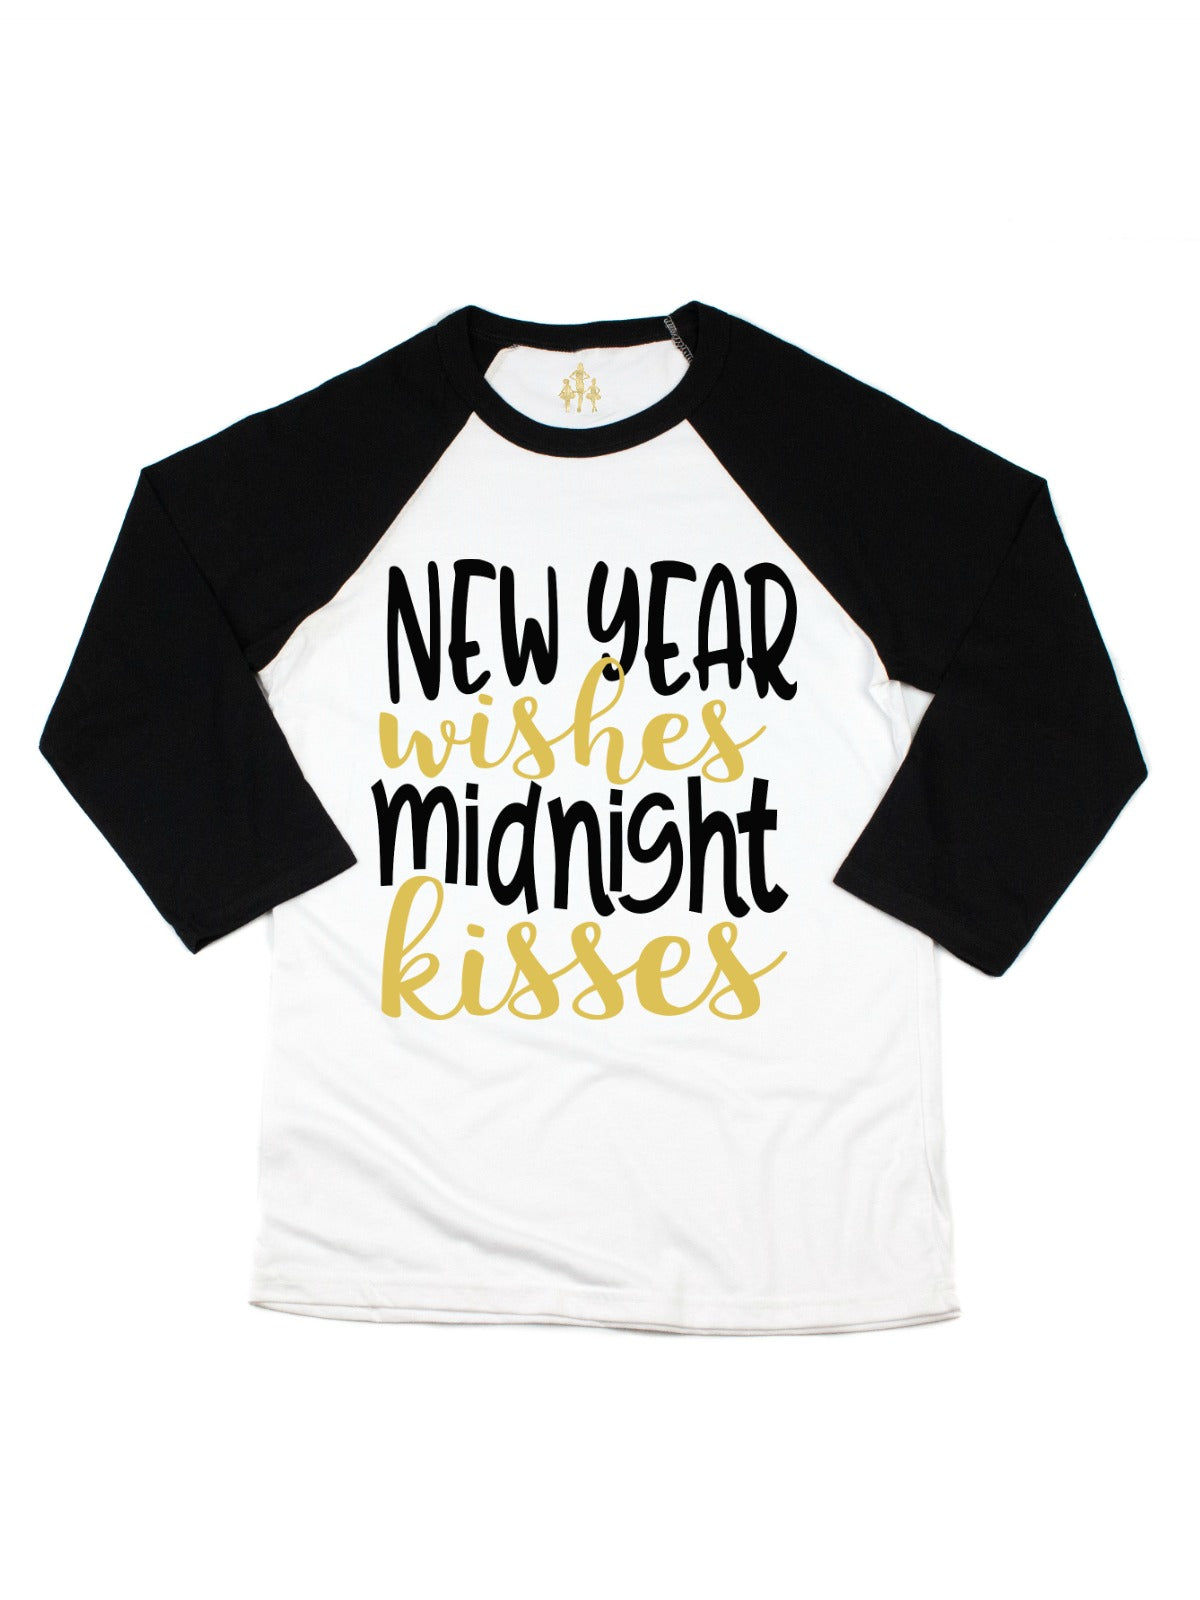 new year wishes midnight kisses adult new years t-shirt